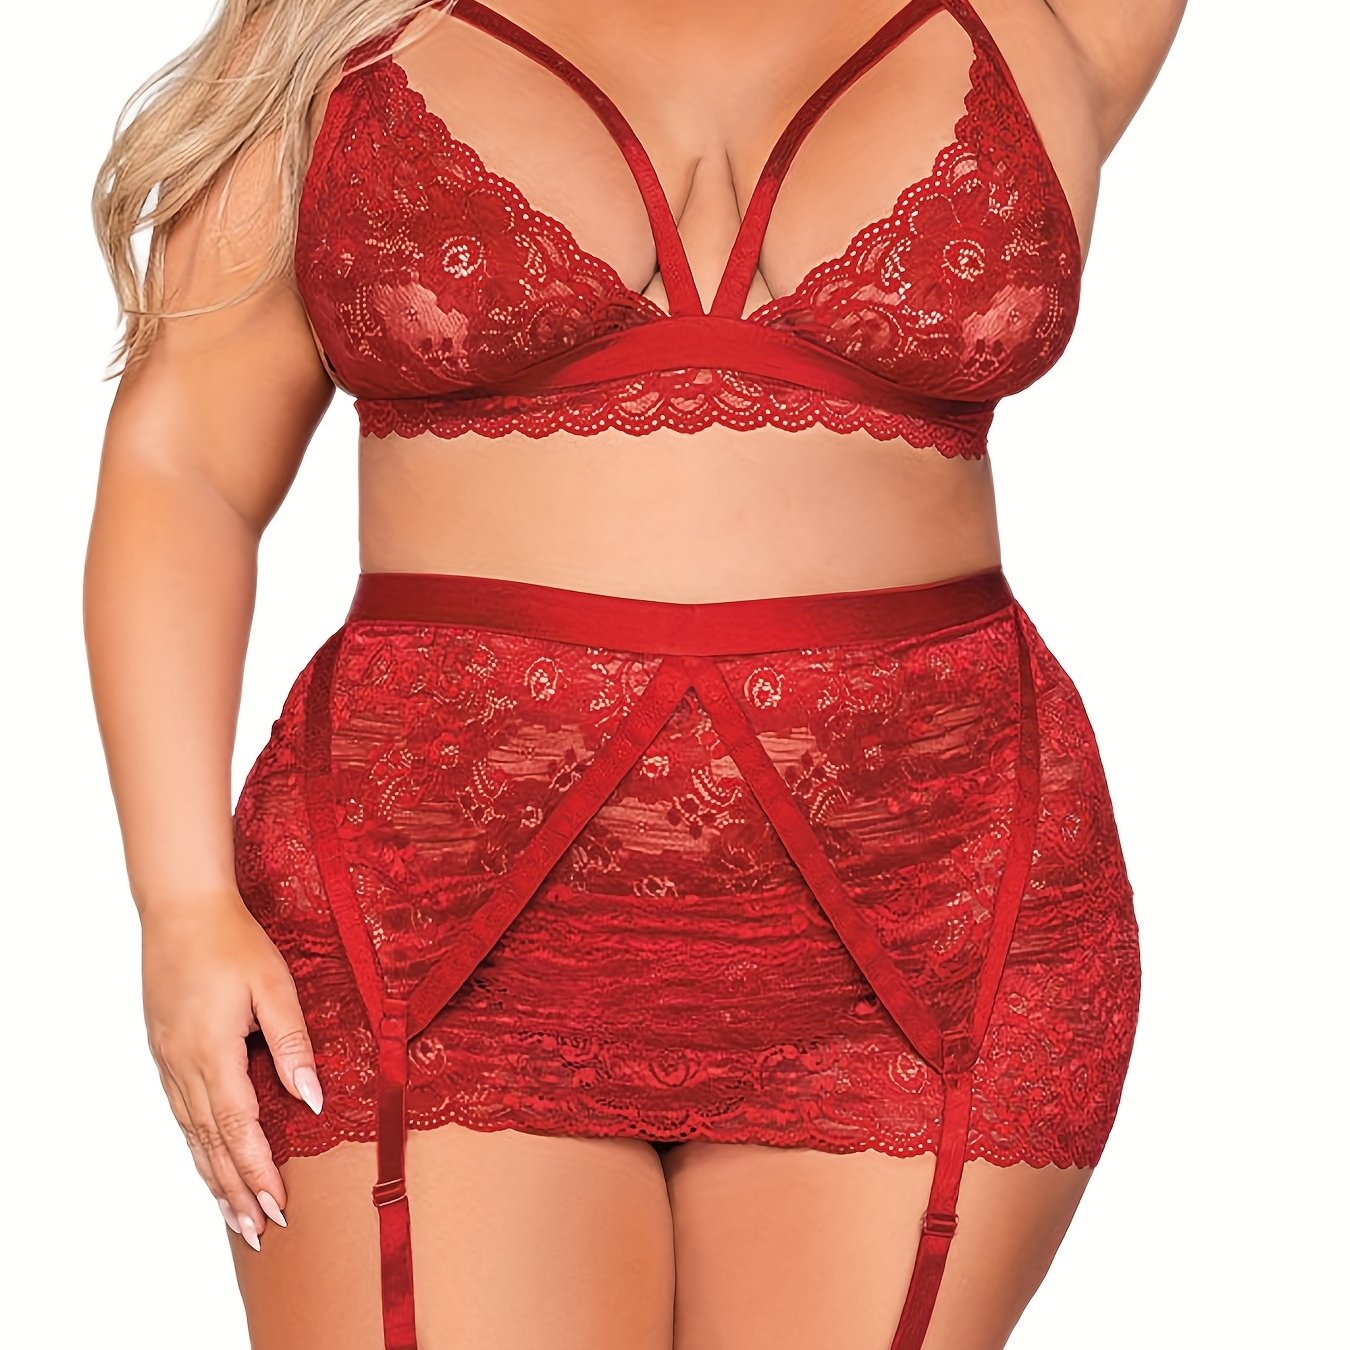 Plus Size Lace Bra Set, Sexy Deep V Corset Lingerie, Seamless Thong Lace  Bra Set For Women From Yanqin03, $18.14